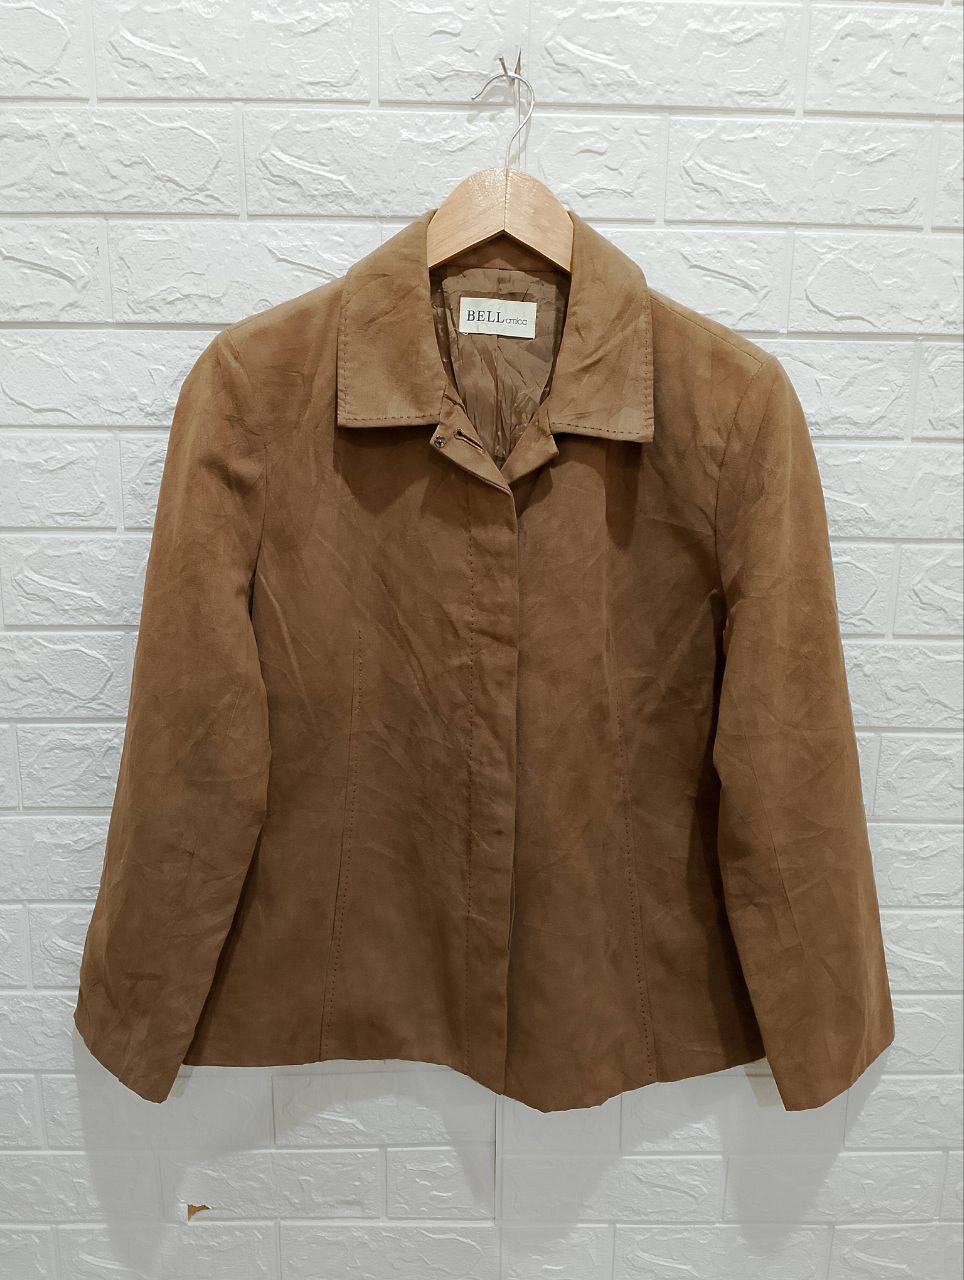 Archival Clothing - BELL AMICA Brown Japan Brand Jacket - 2